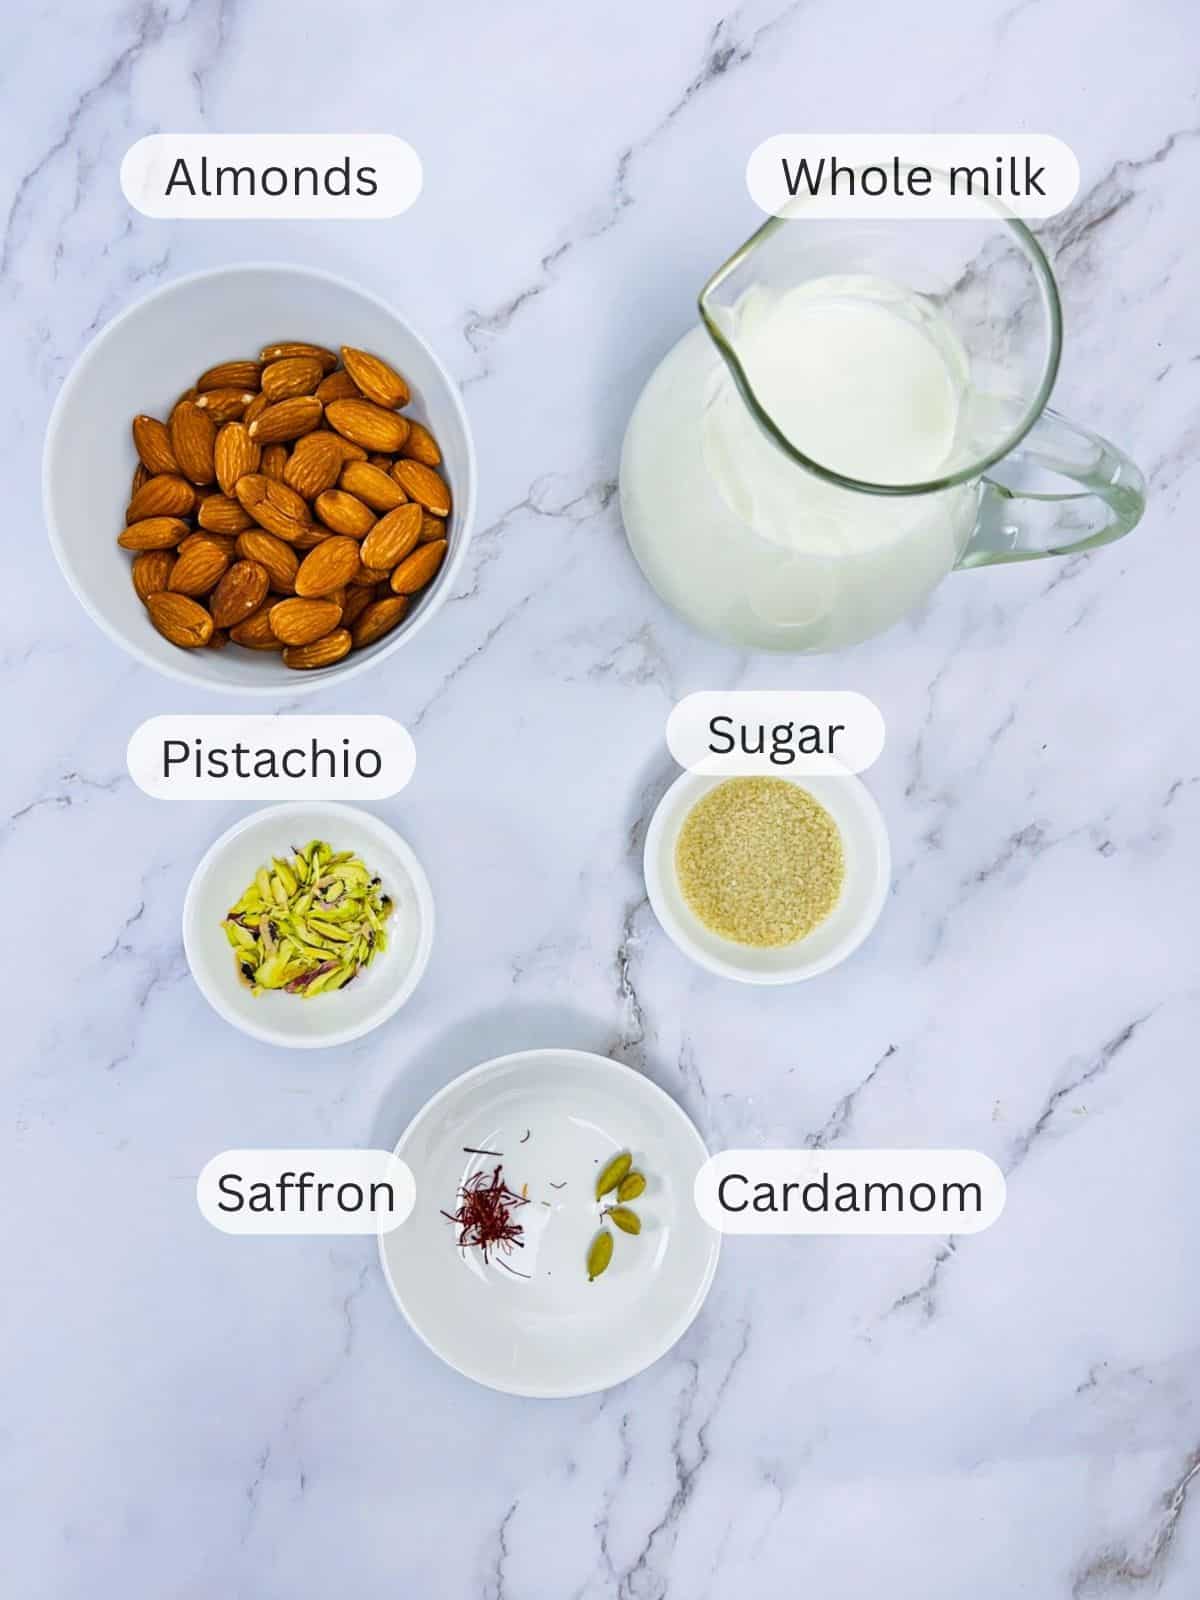 Badam milk ingredients placed on a white marble board.